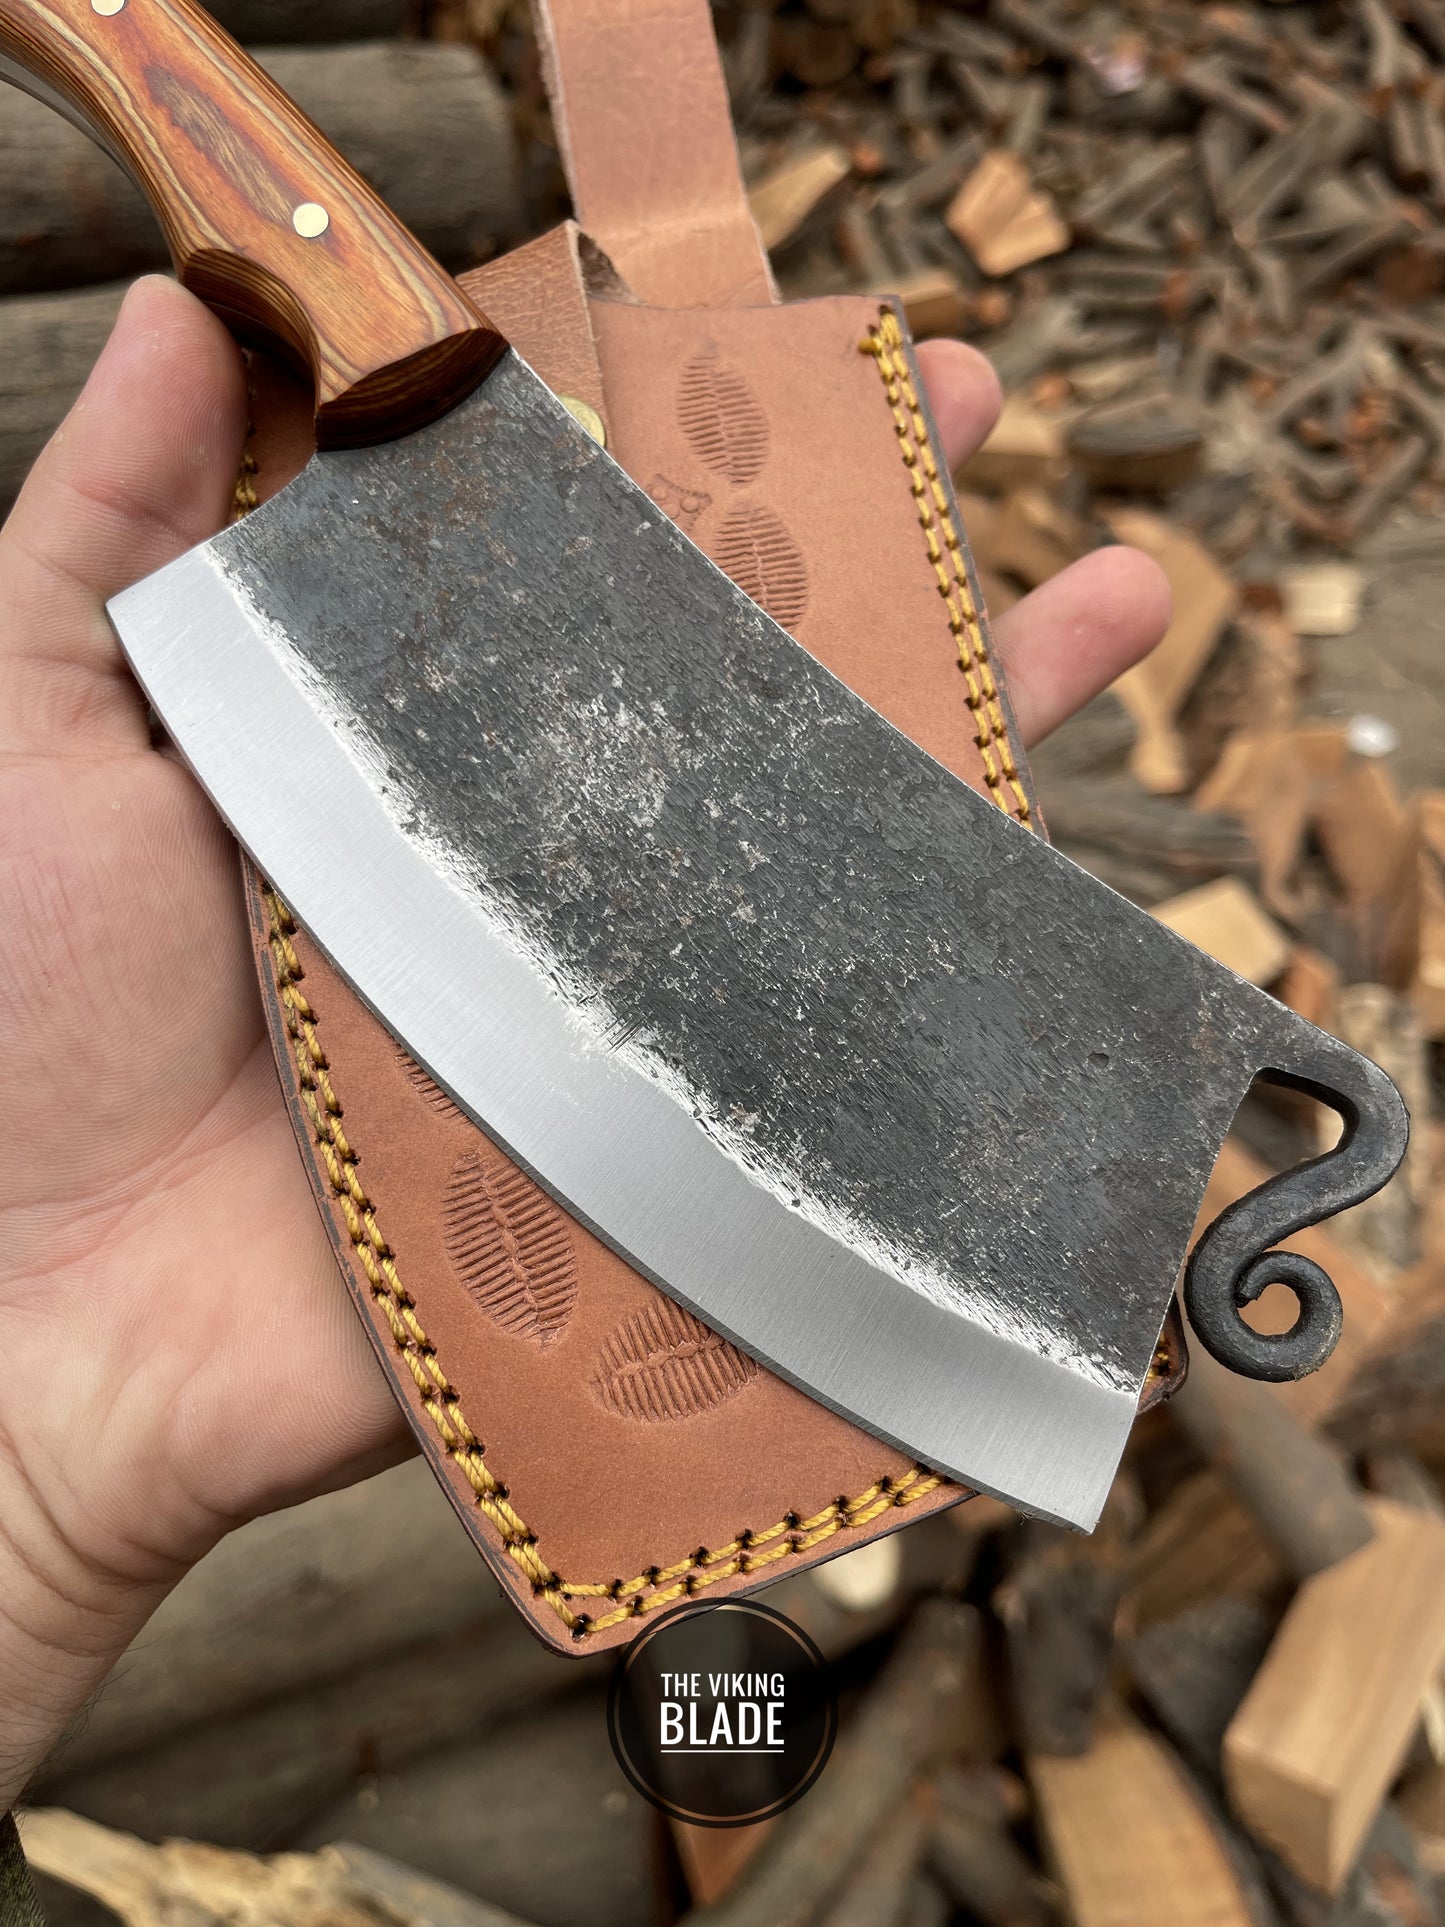 Custom Hand Forged Carbon Steel Cleaver Chef Fixed Blade Knife With Leather Sheath